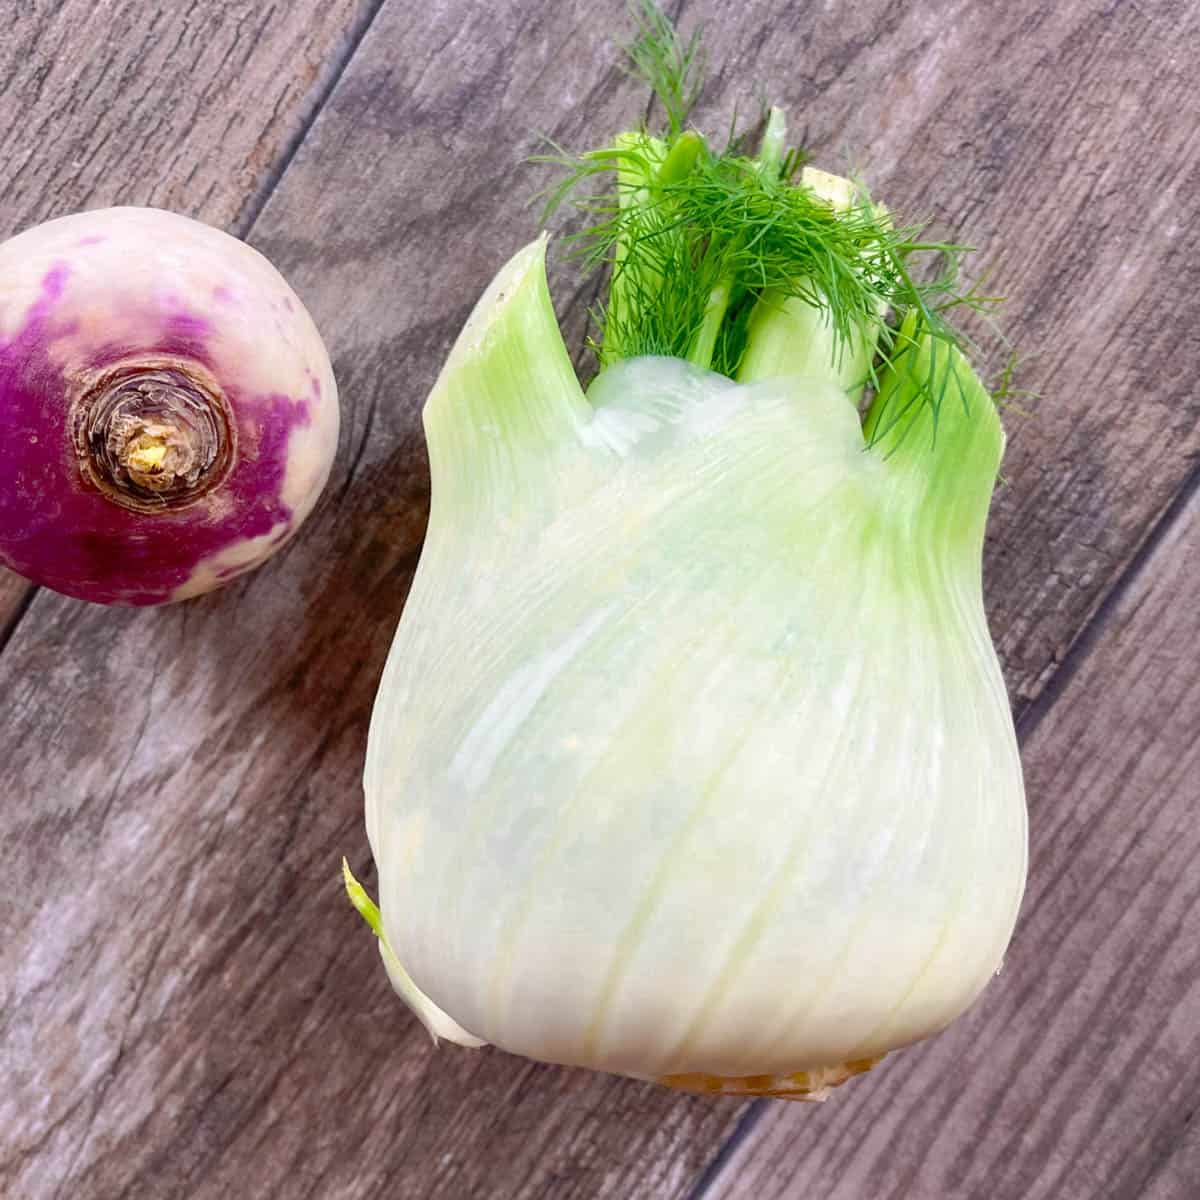 Whole fennel bulb and turnip on a wood board ready to chop.